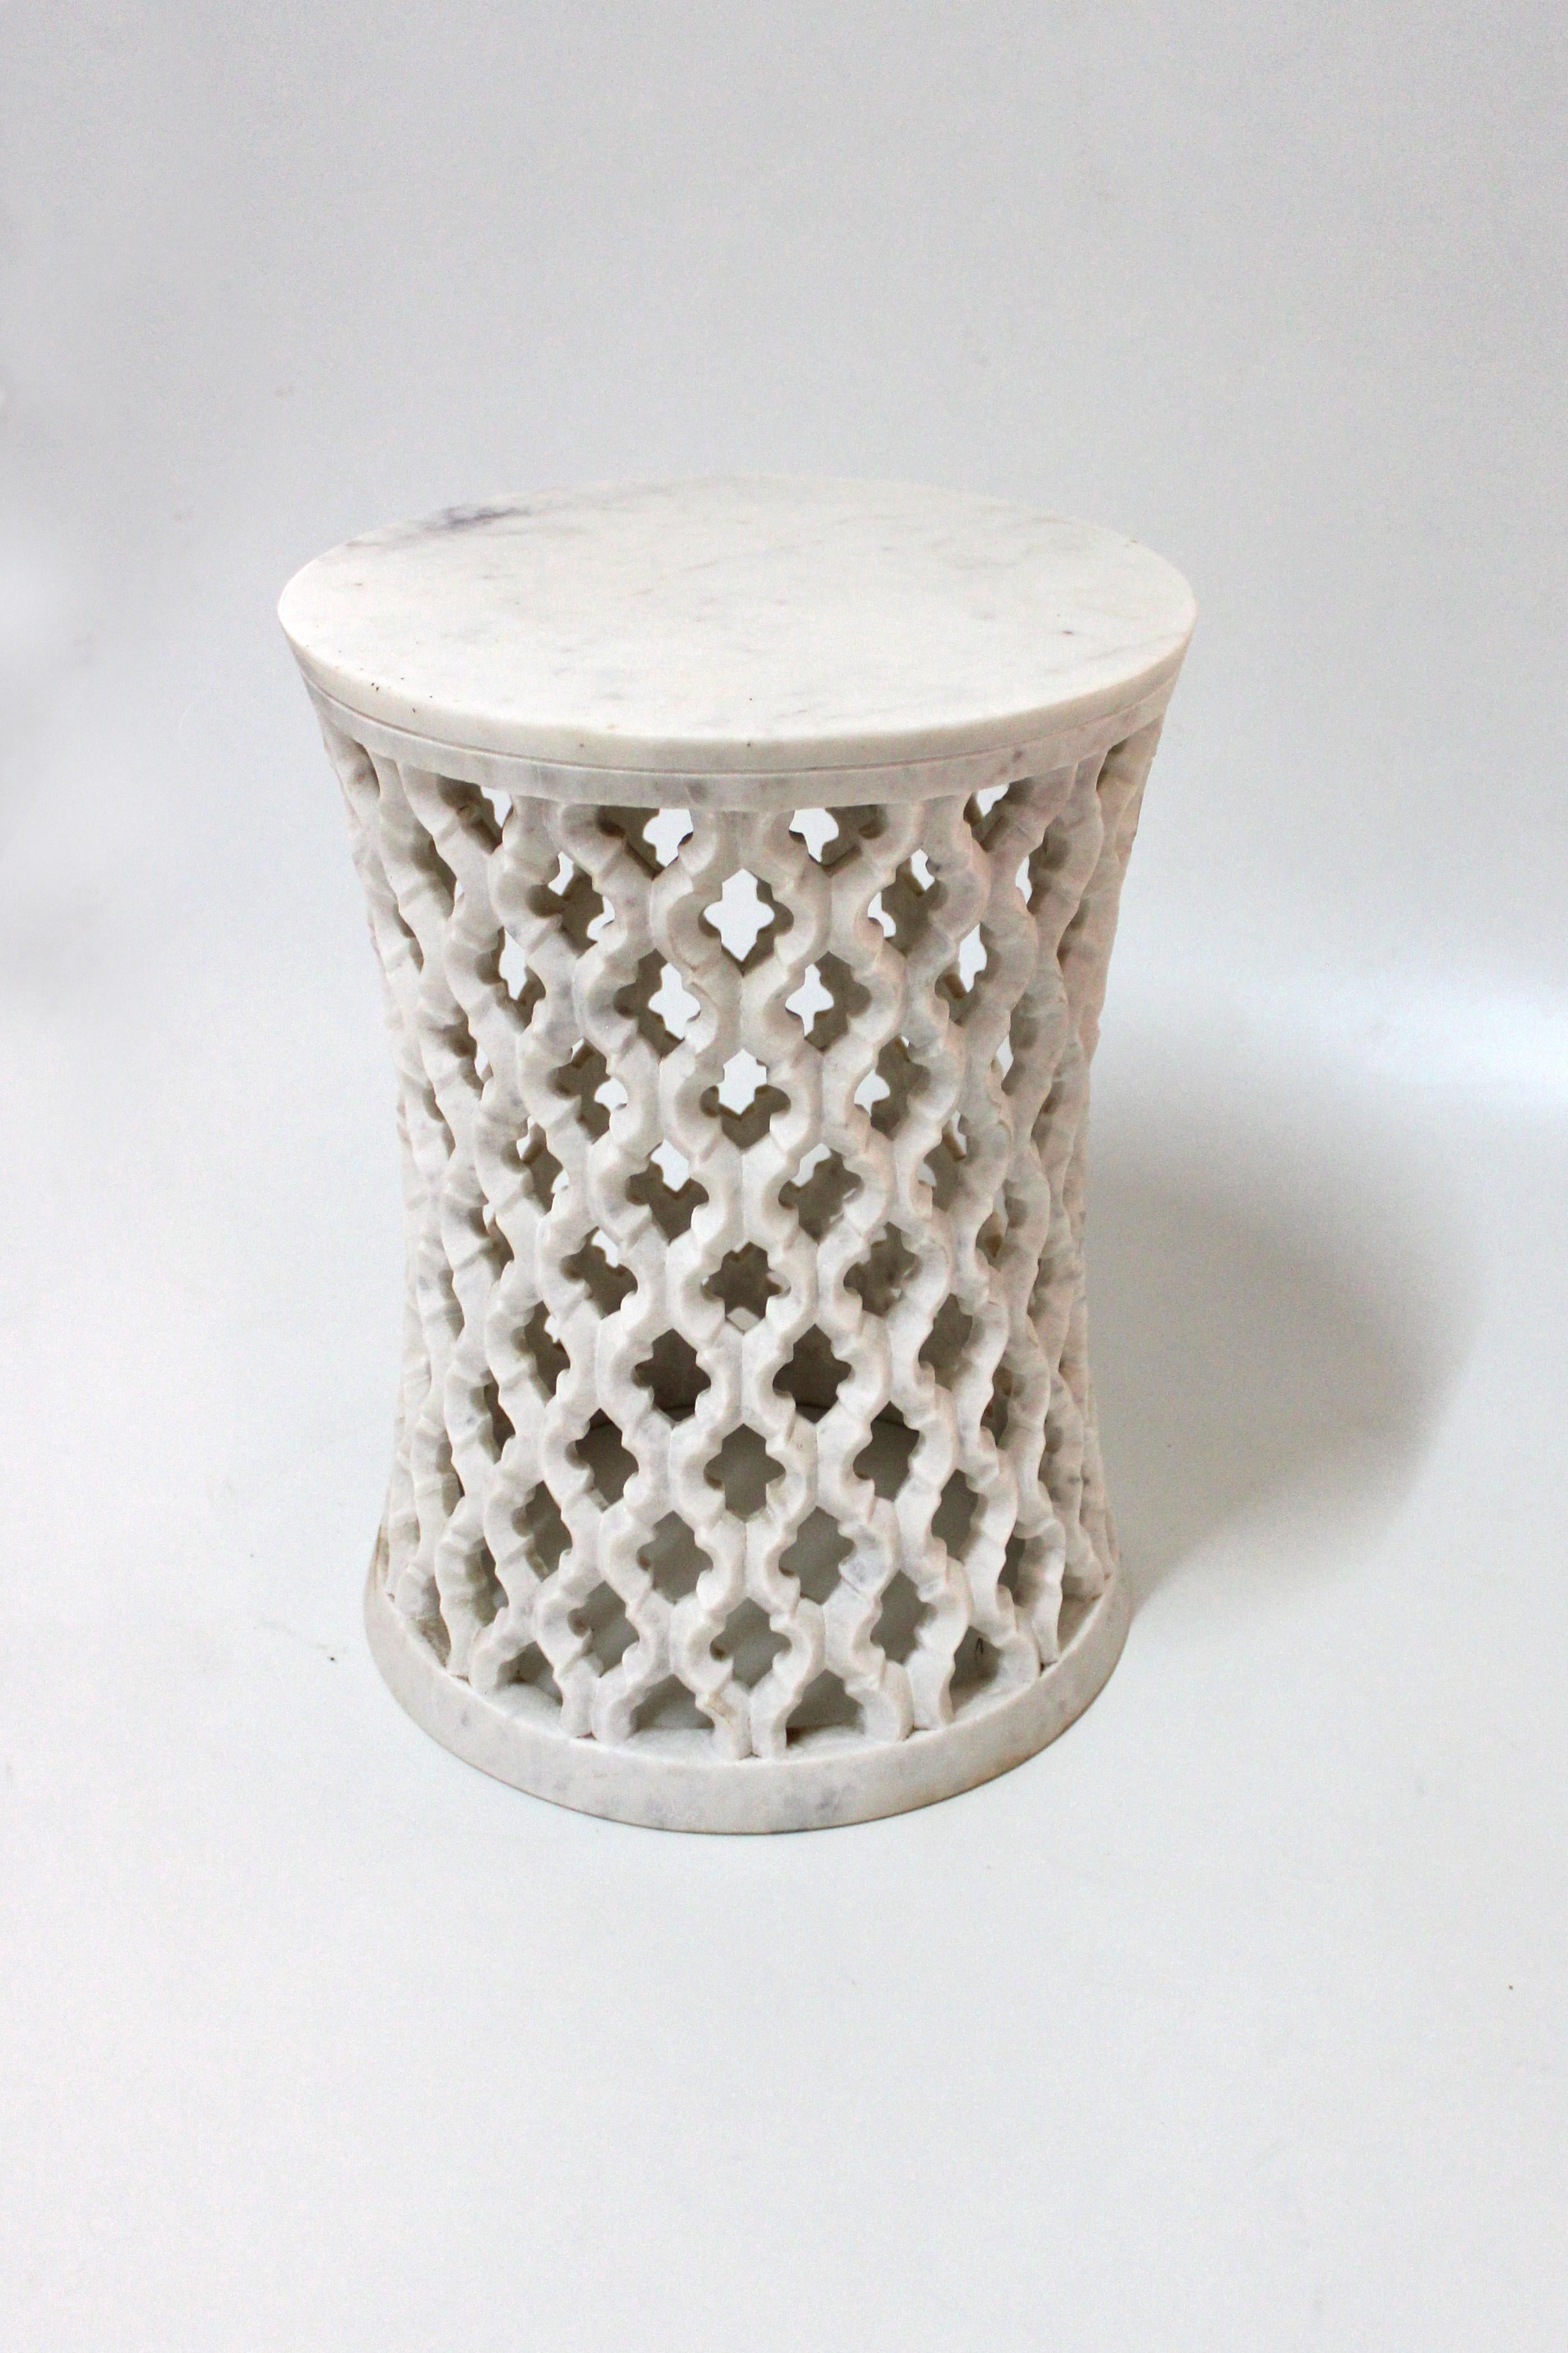 Inspired by the elegant pierced marble “jali” screens and windows he saw in the palaces of Mughal India, the renowned designer Paul Mathieu created a unique collection of hand carved side tables.
 
Solid blocks of marble are hollowed out and